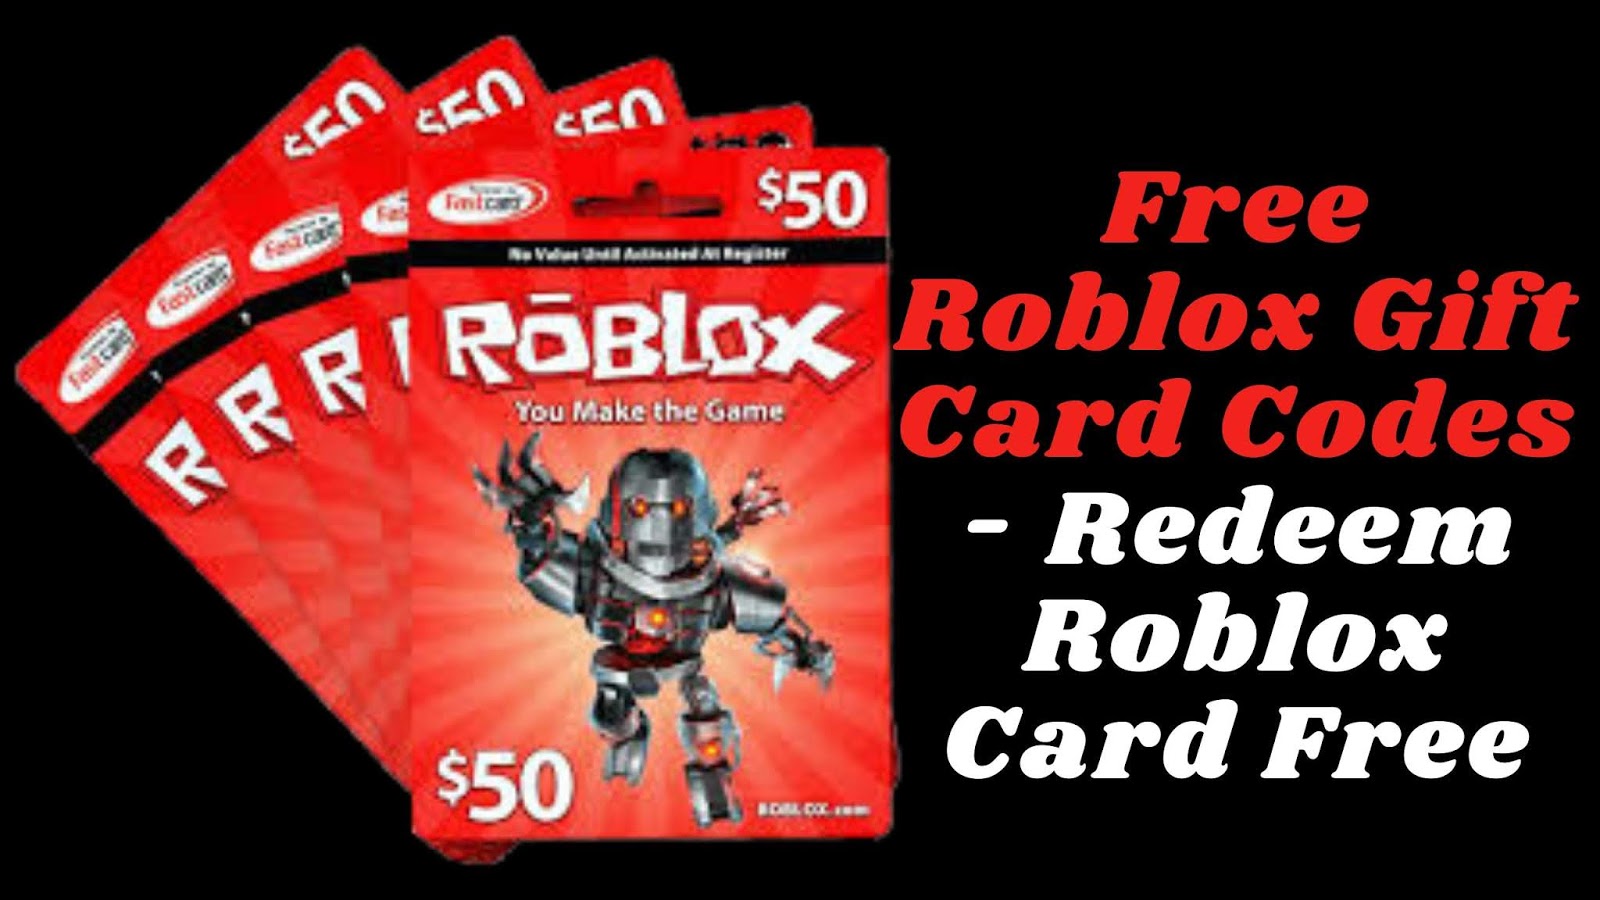 Free Gift Cards Free Roblox Gift Card Codes Redeem Roblox Card Free - gift card roblox com redeem